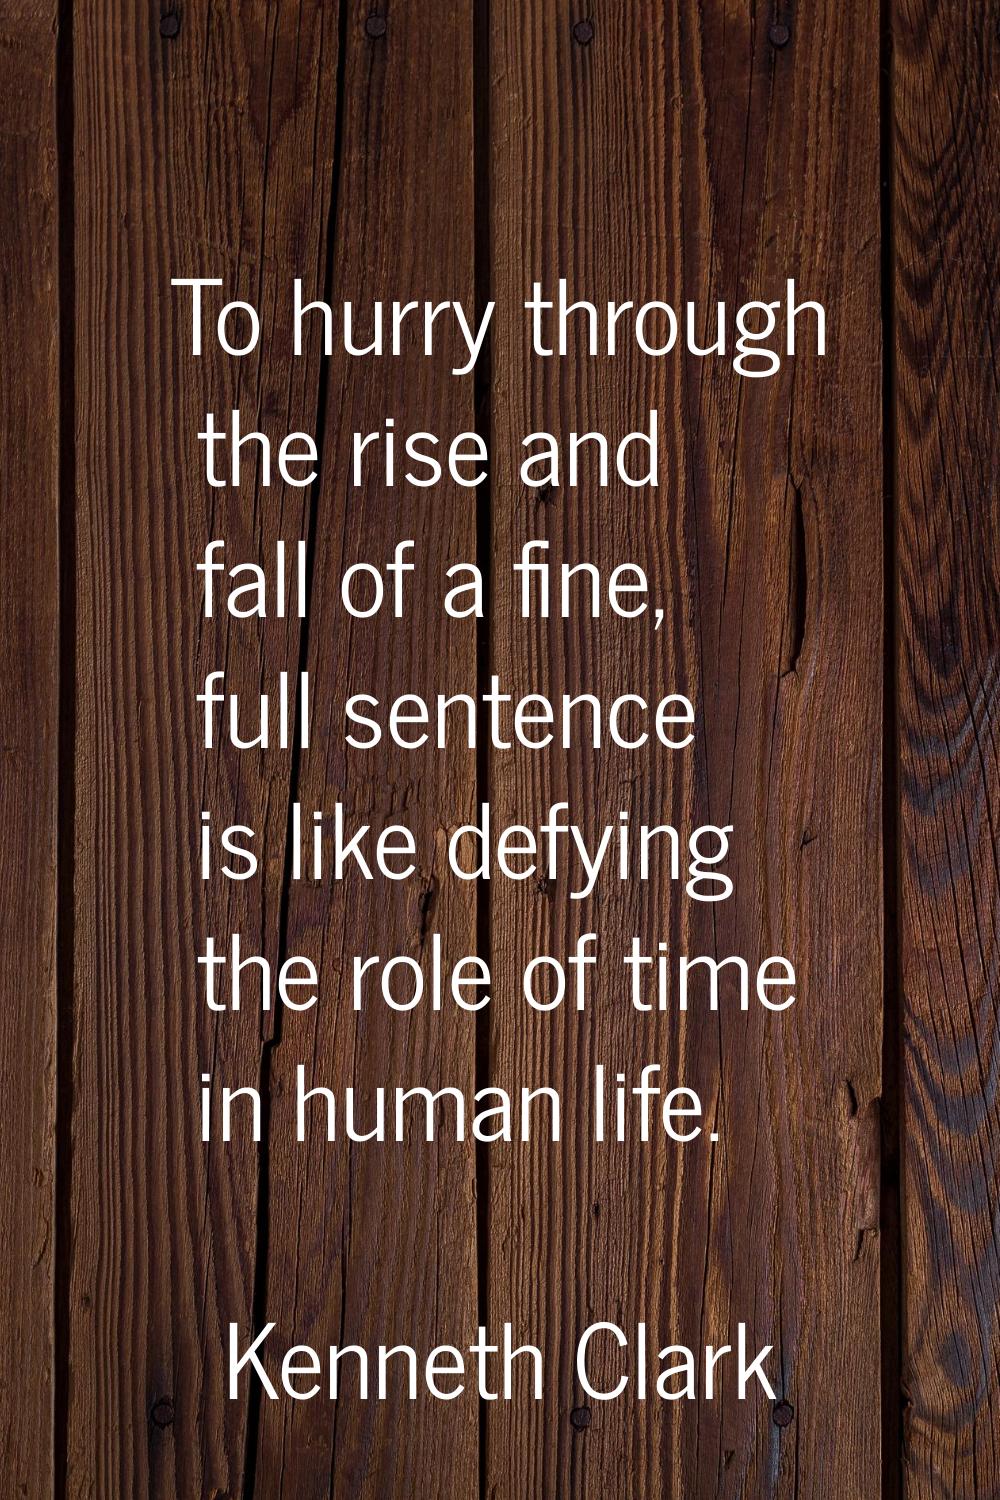 To hurry through the rise and fall of a fine, full sentence is like defying the role of time in hum